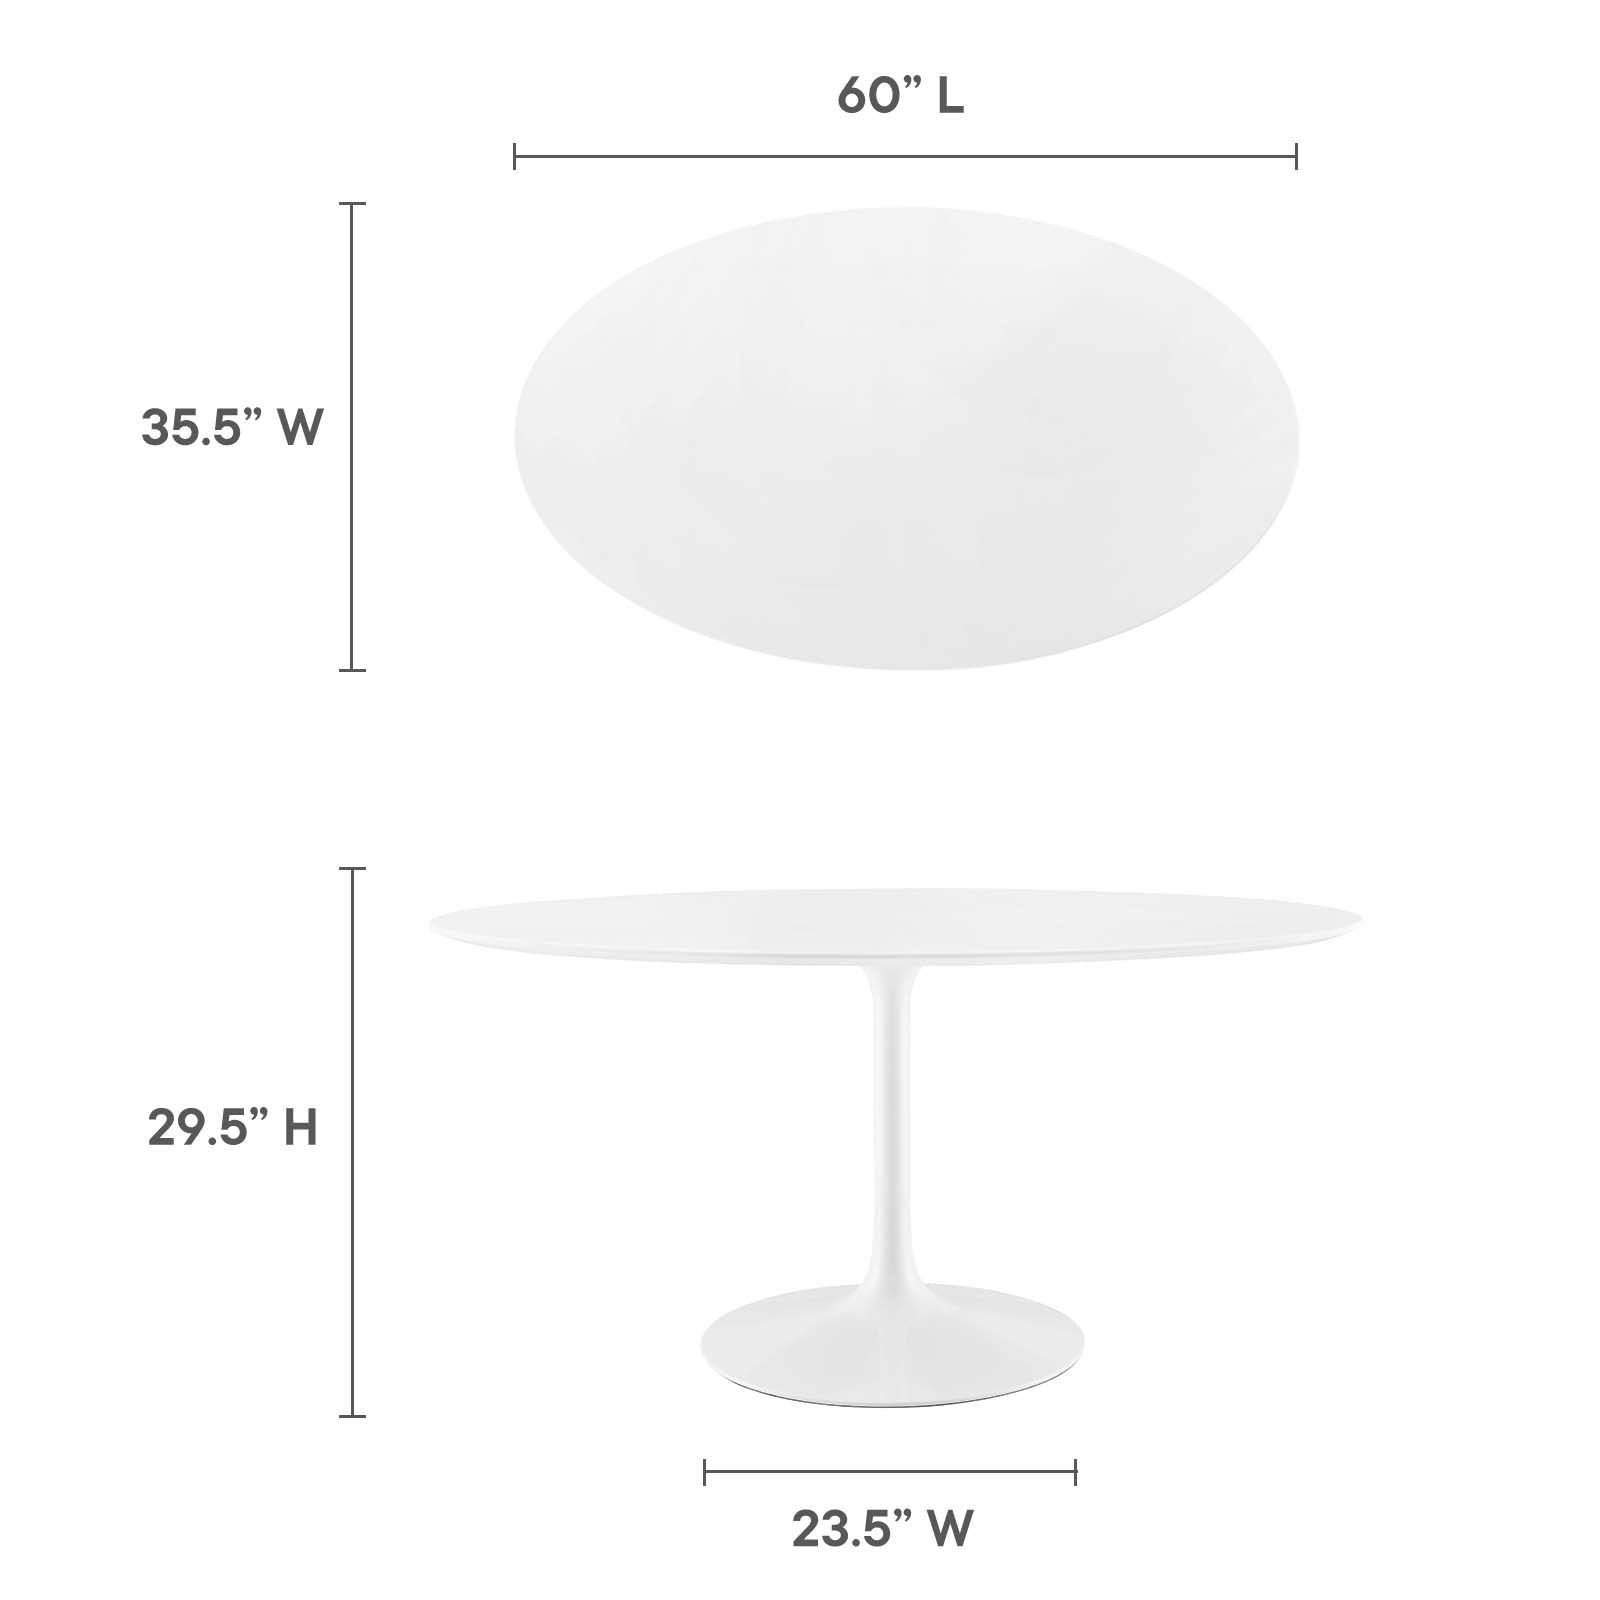 Lippa 60" Oval Wood Top Dining Table - East Shore Modern Home Furnishings